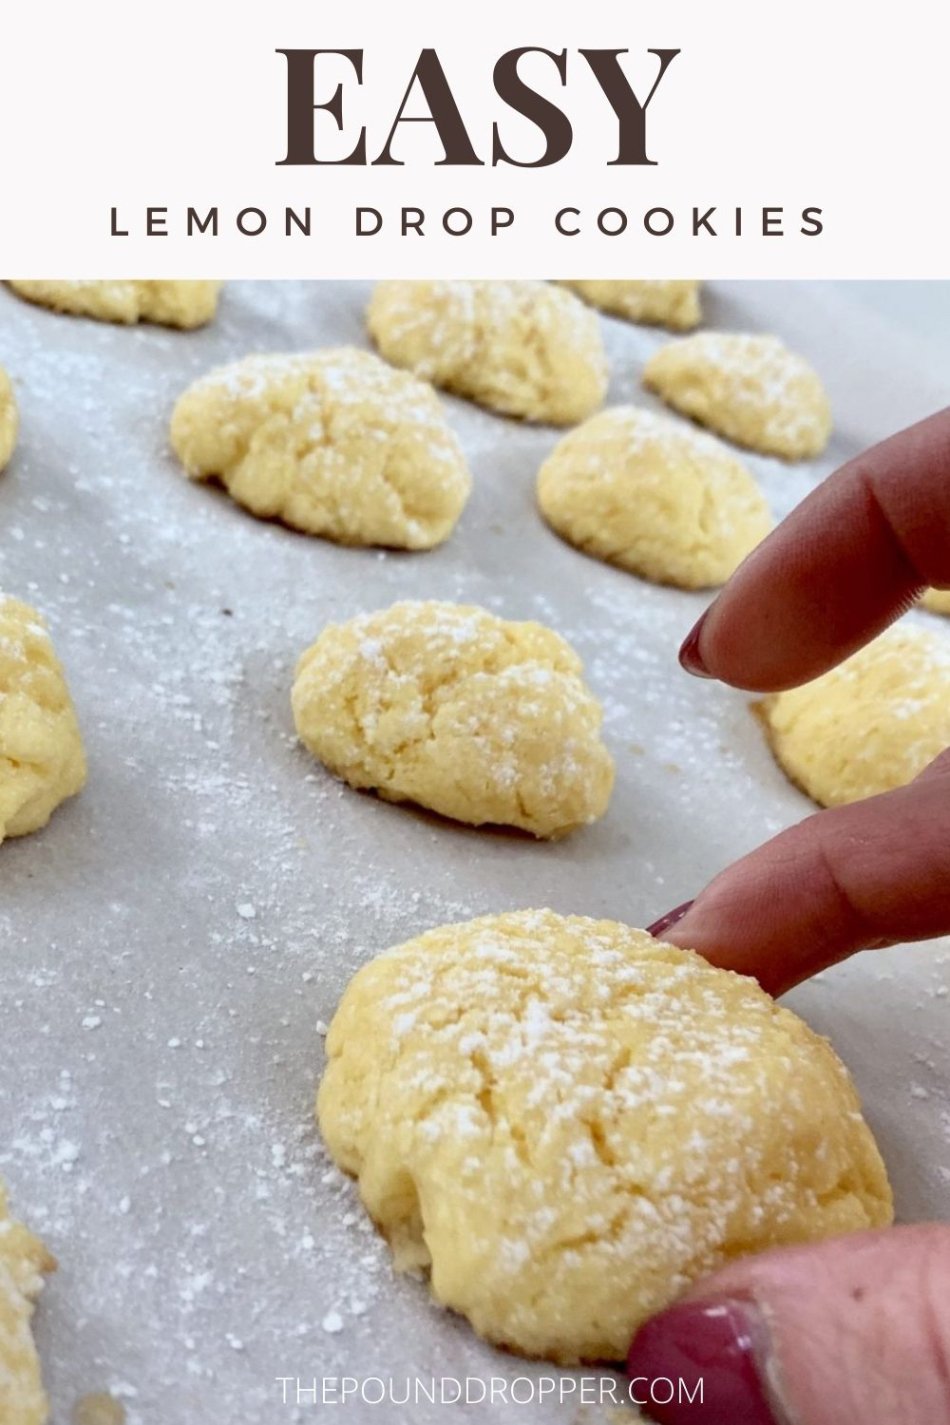 These Easy Lemon Drop Cookies are super simple to make, incredibly delicious, and are the perfect cookie for any occasion. via @pounddropper